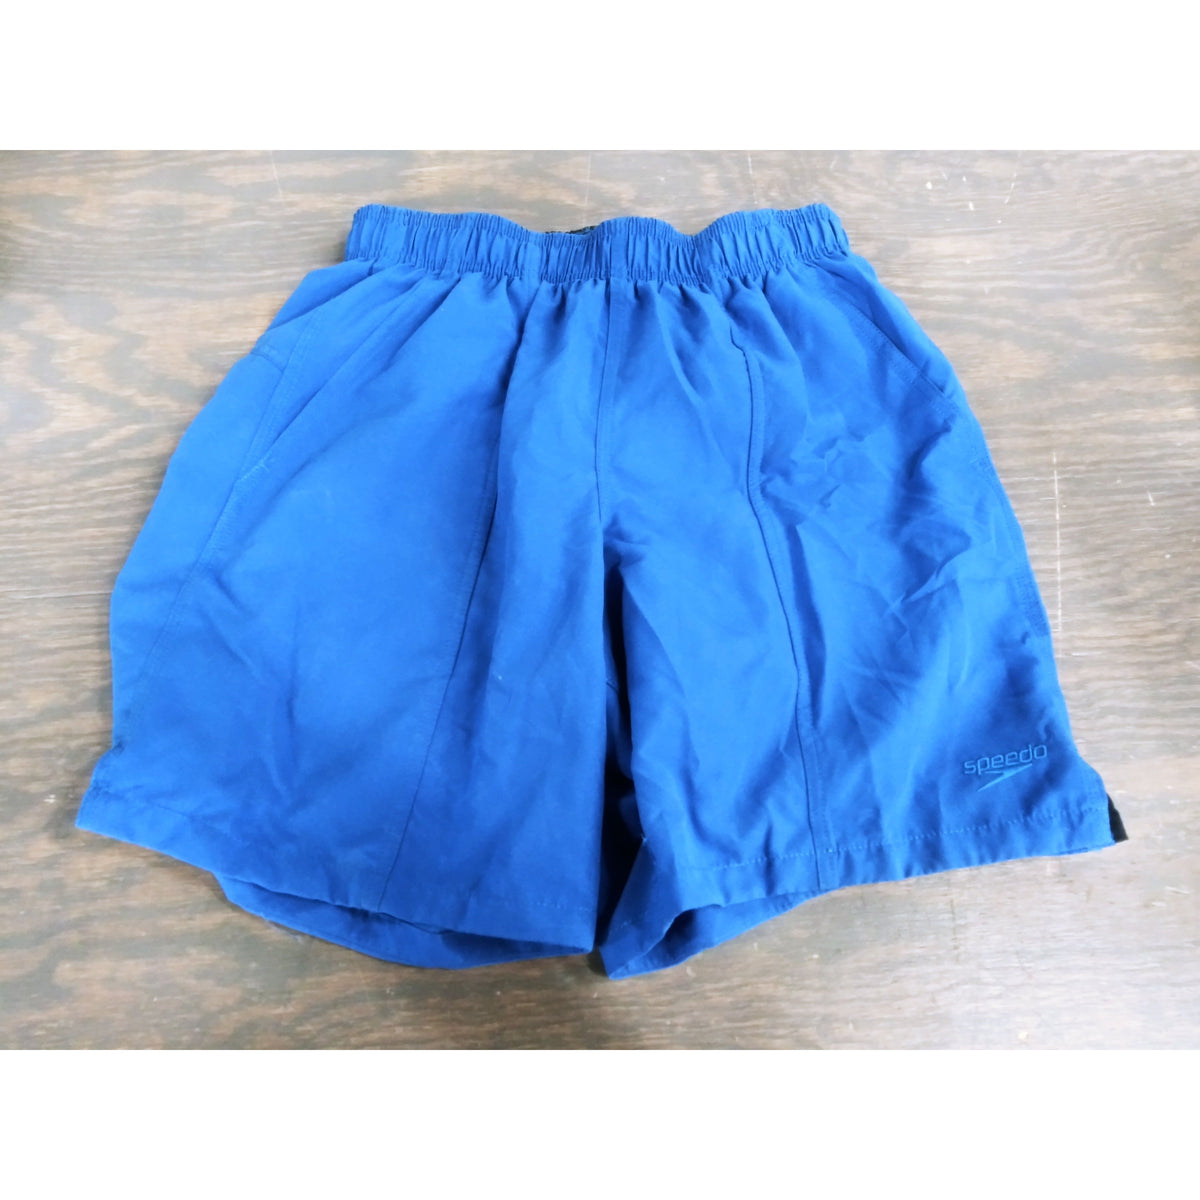 Speedo Rally Volley Shorts - Classic Blue - Small - Used - Acceptable